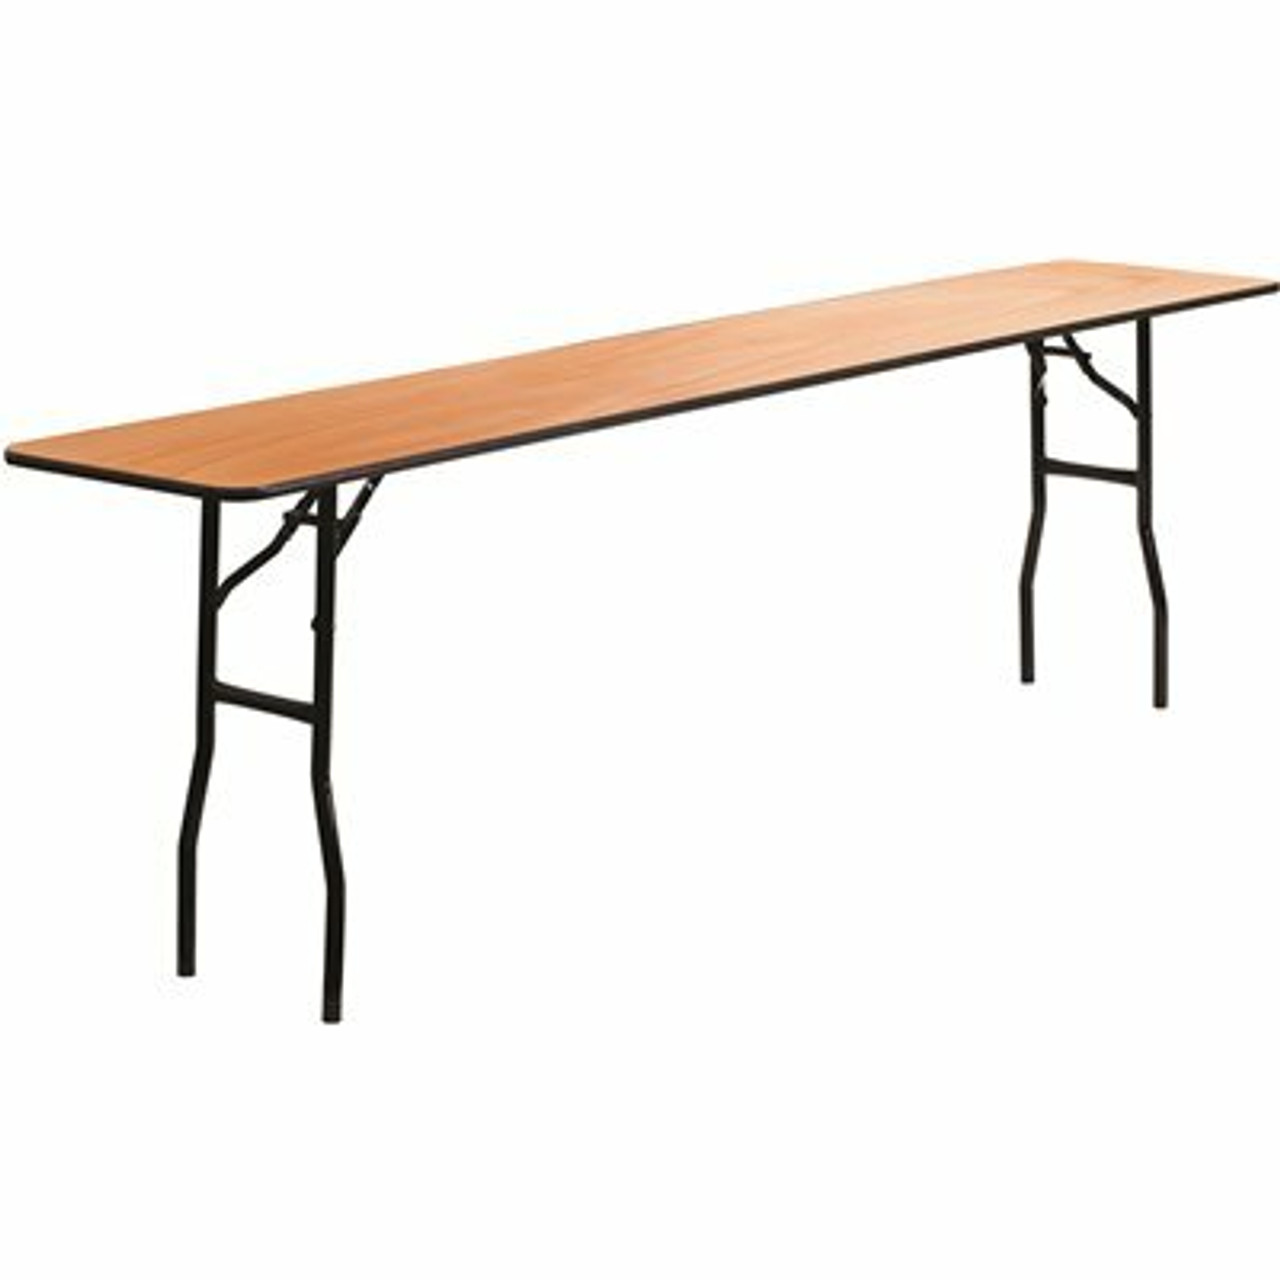 96 In. Natural Wood Tabletop Metal Frame Folding Table - 308688159